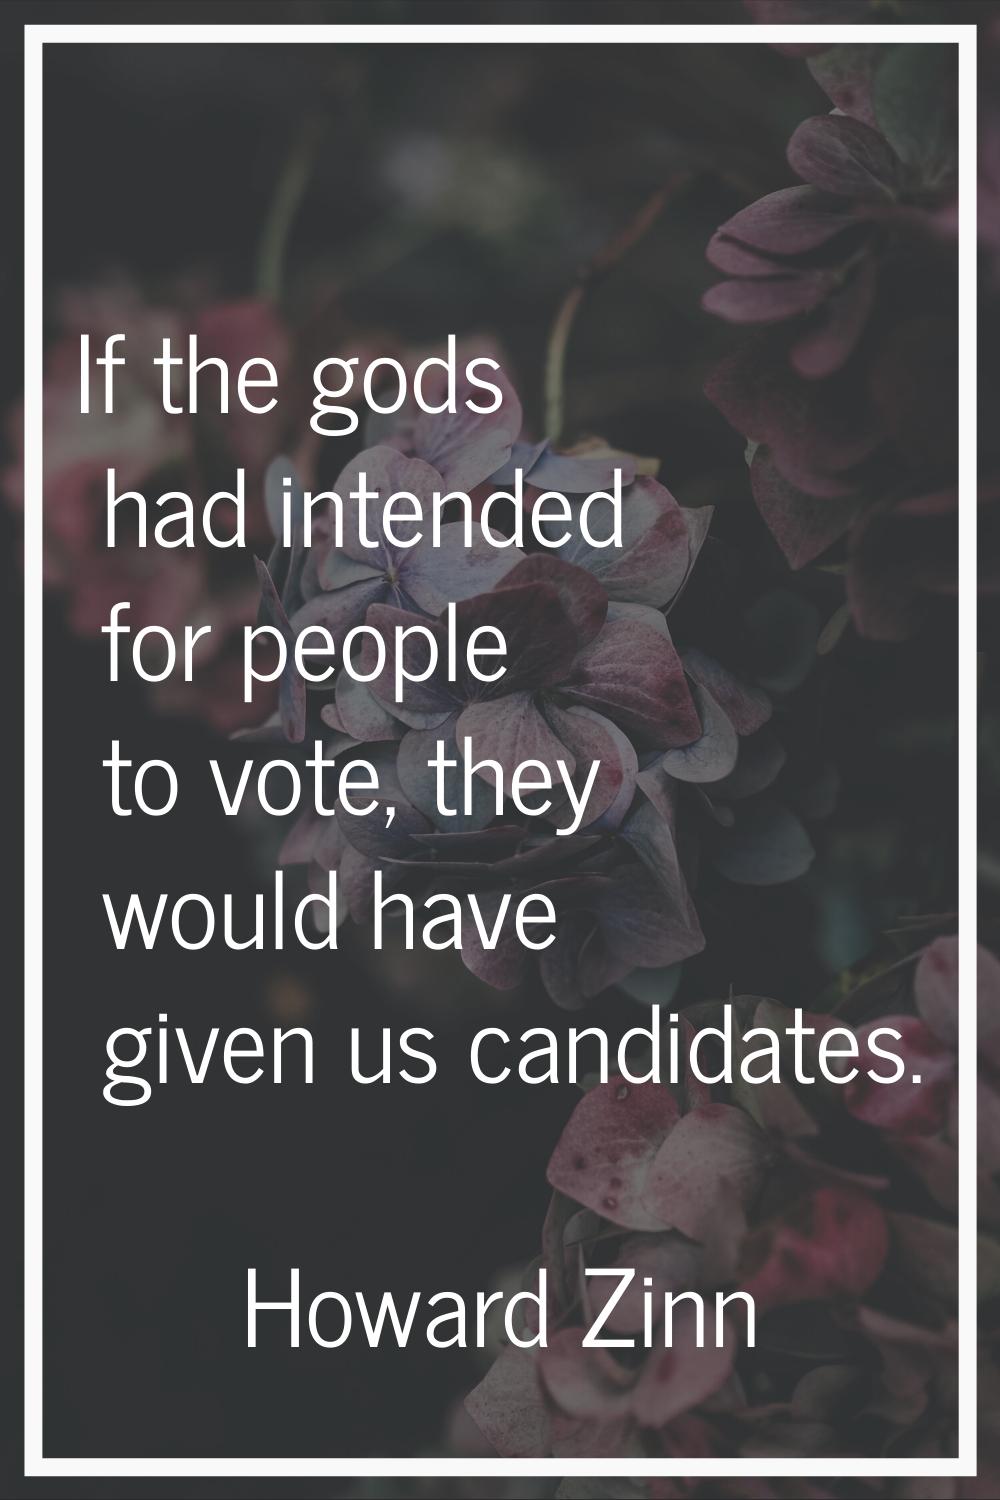 If the gods had intended for people to vote, they would have given us candidates.